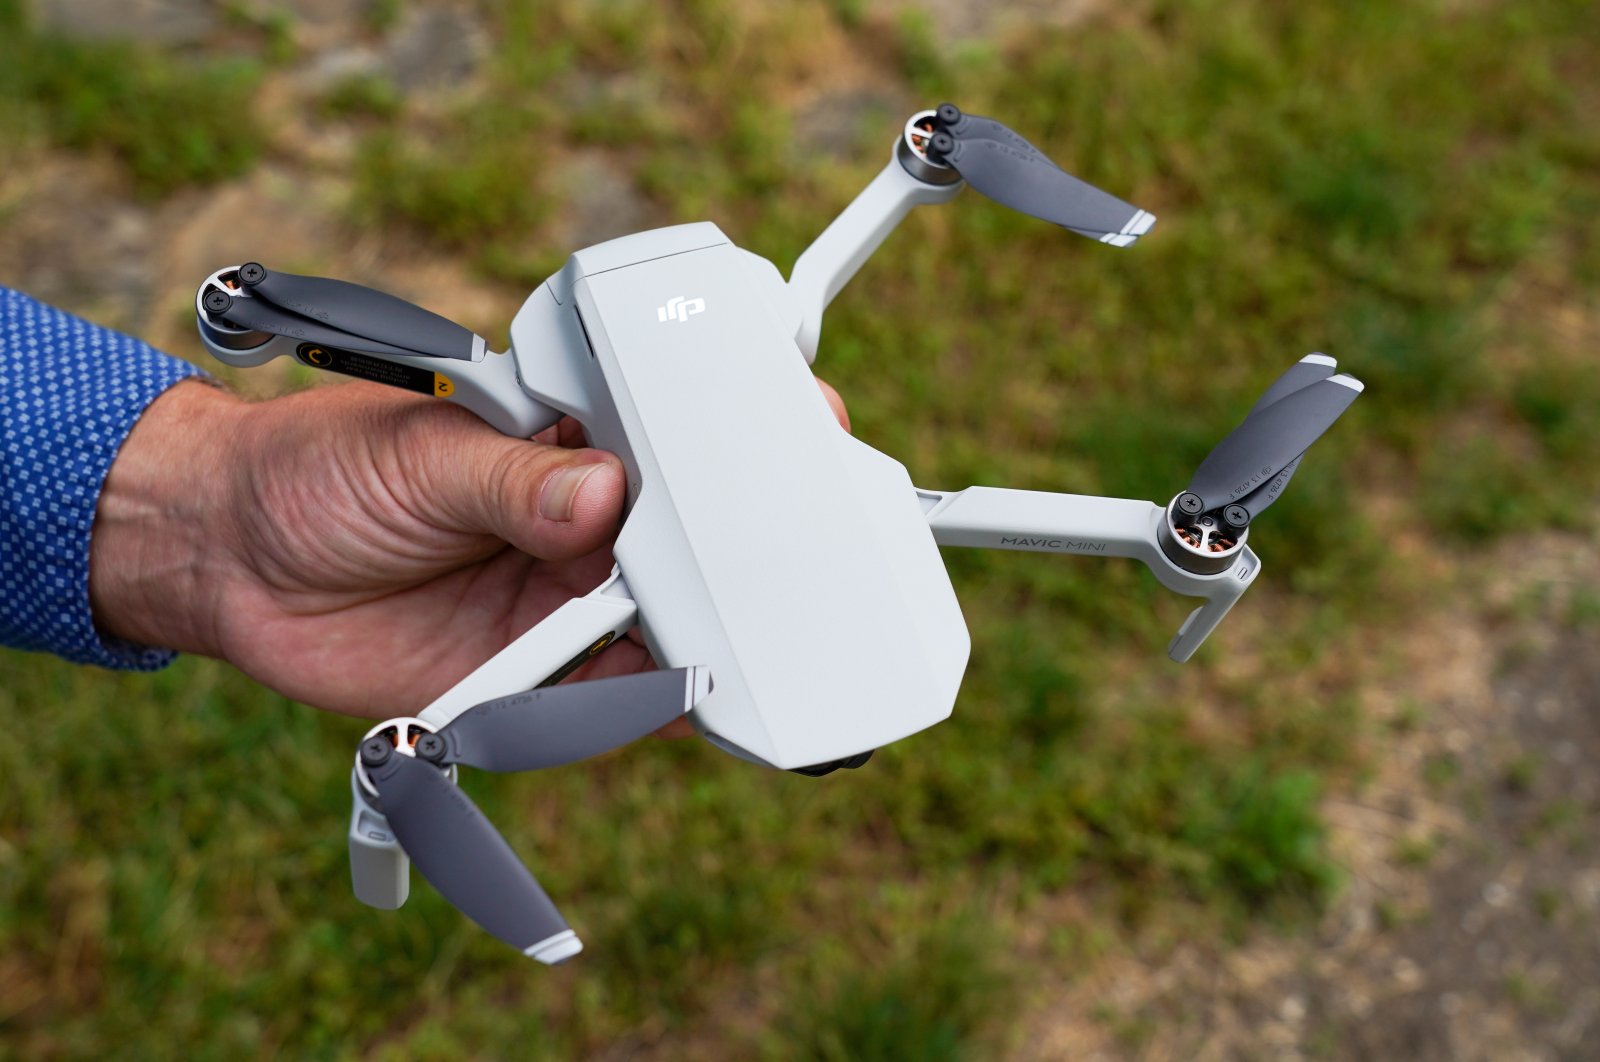 Ralph Werner of Quadrocopter Flight School holds a drone, a DJI Mavic Mini, in a park. (Reuters File Photo)